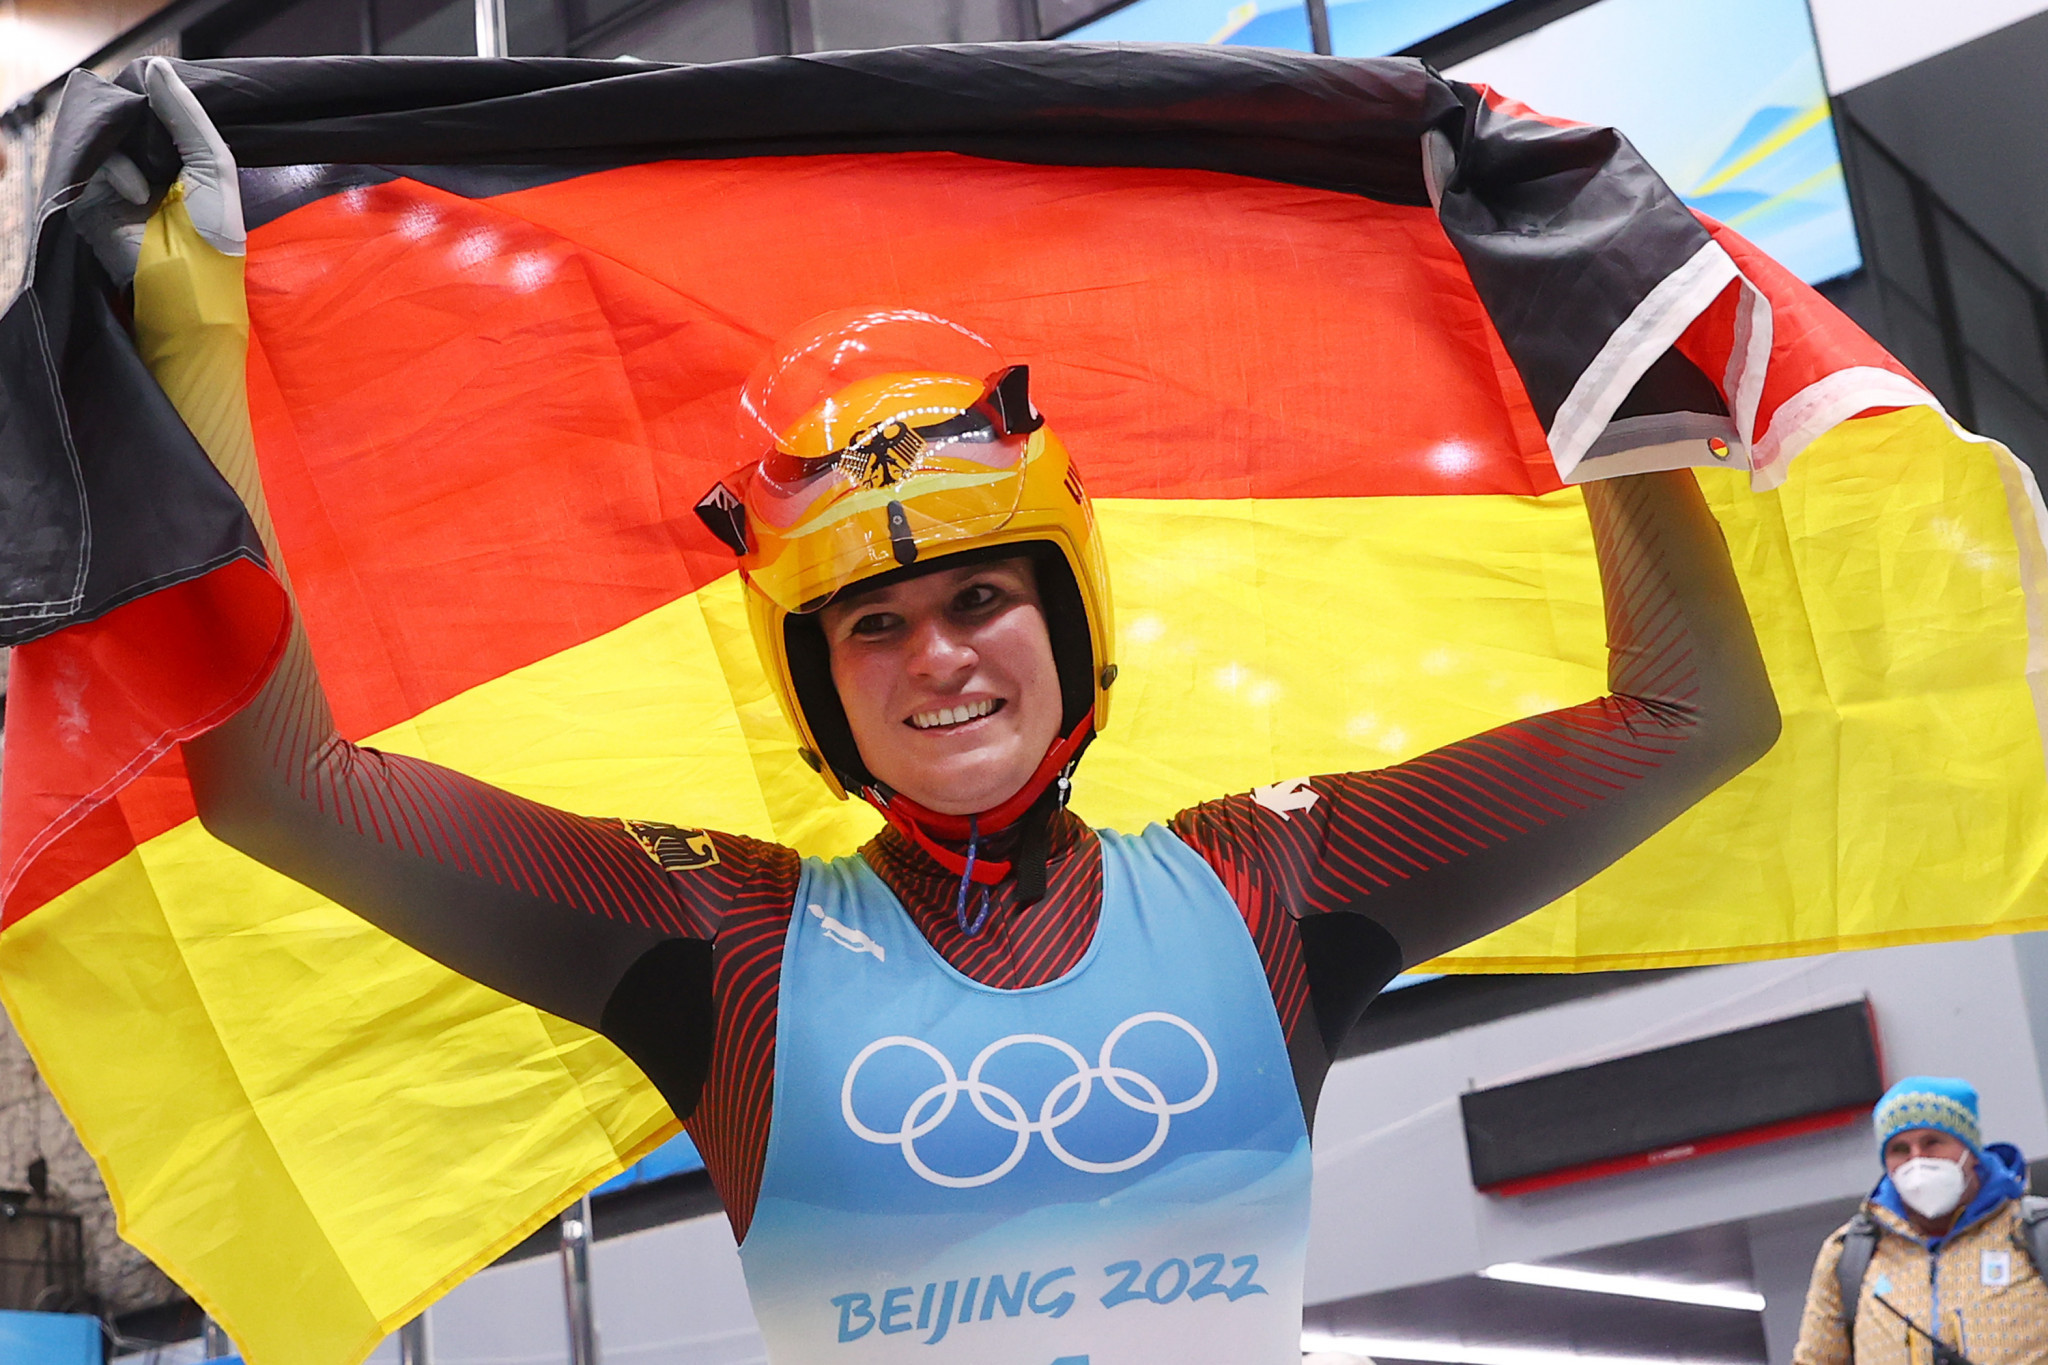 German dominance of luge also continued, with Natalie Geisenberger winning the women's gold medal ©Getty Images